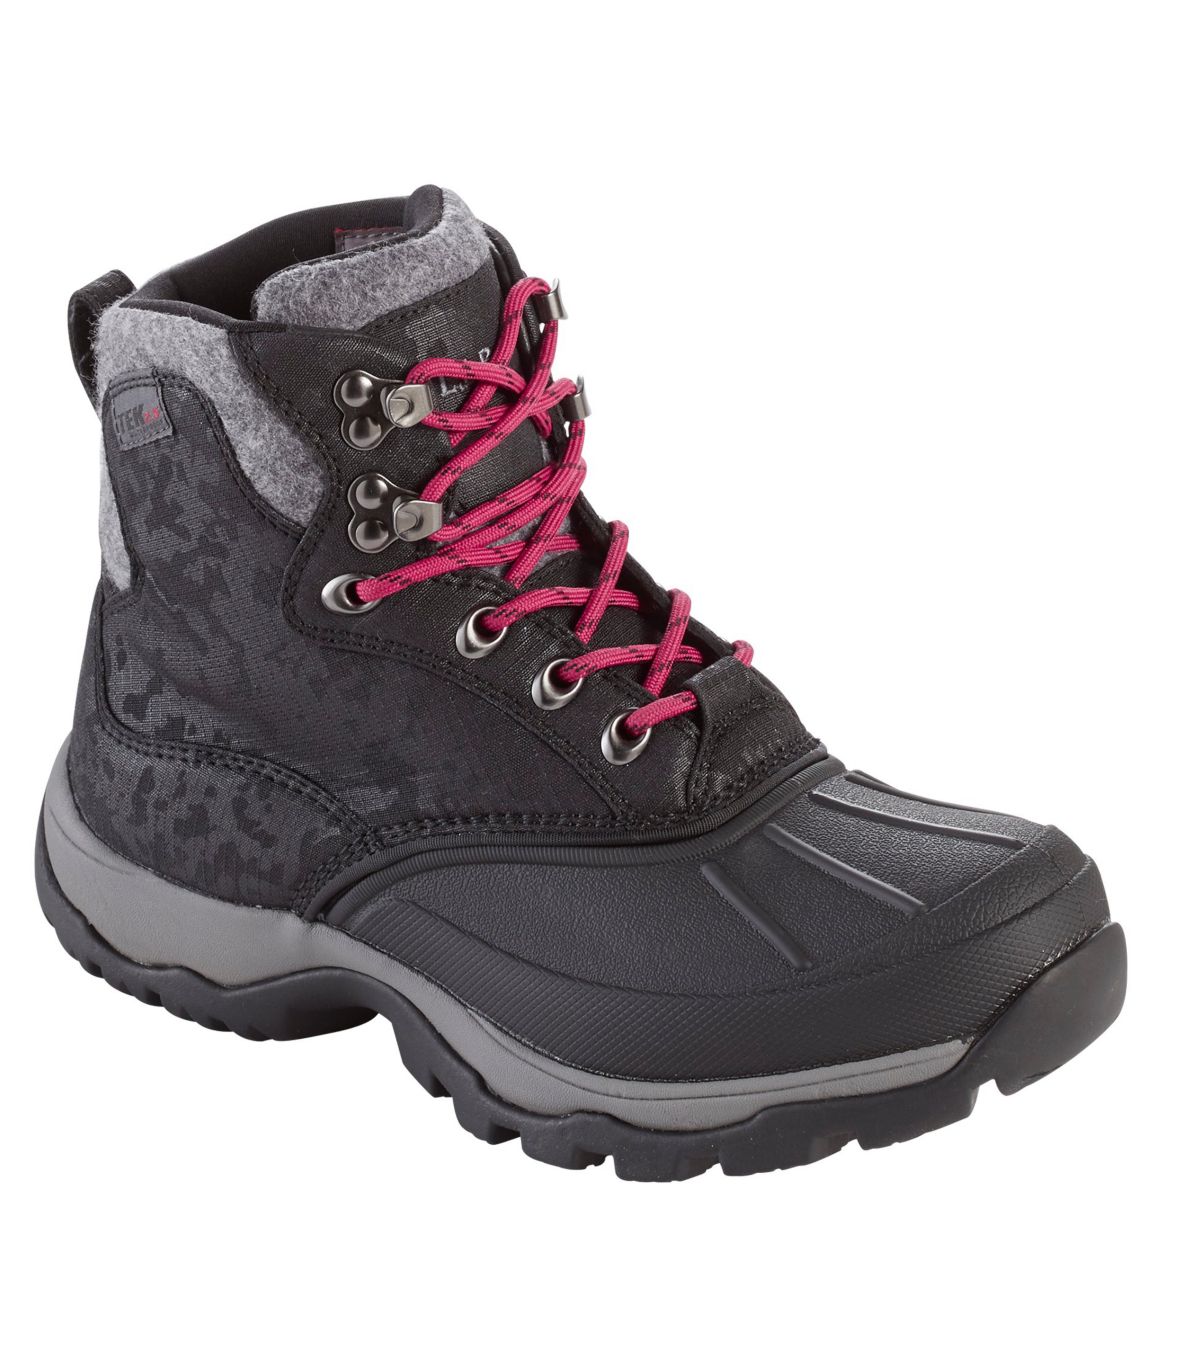 Women's Storm Chaser Boots, Mesh Lace-Up